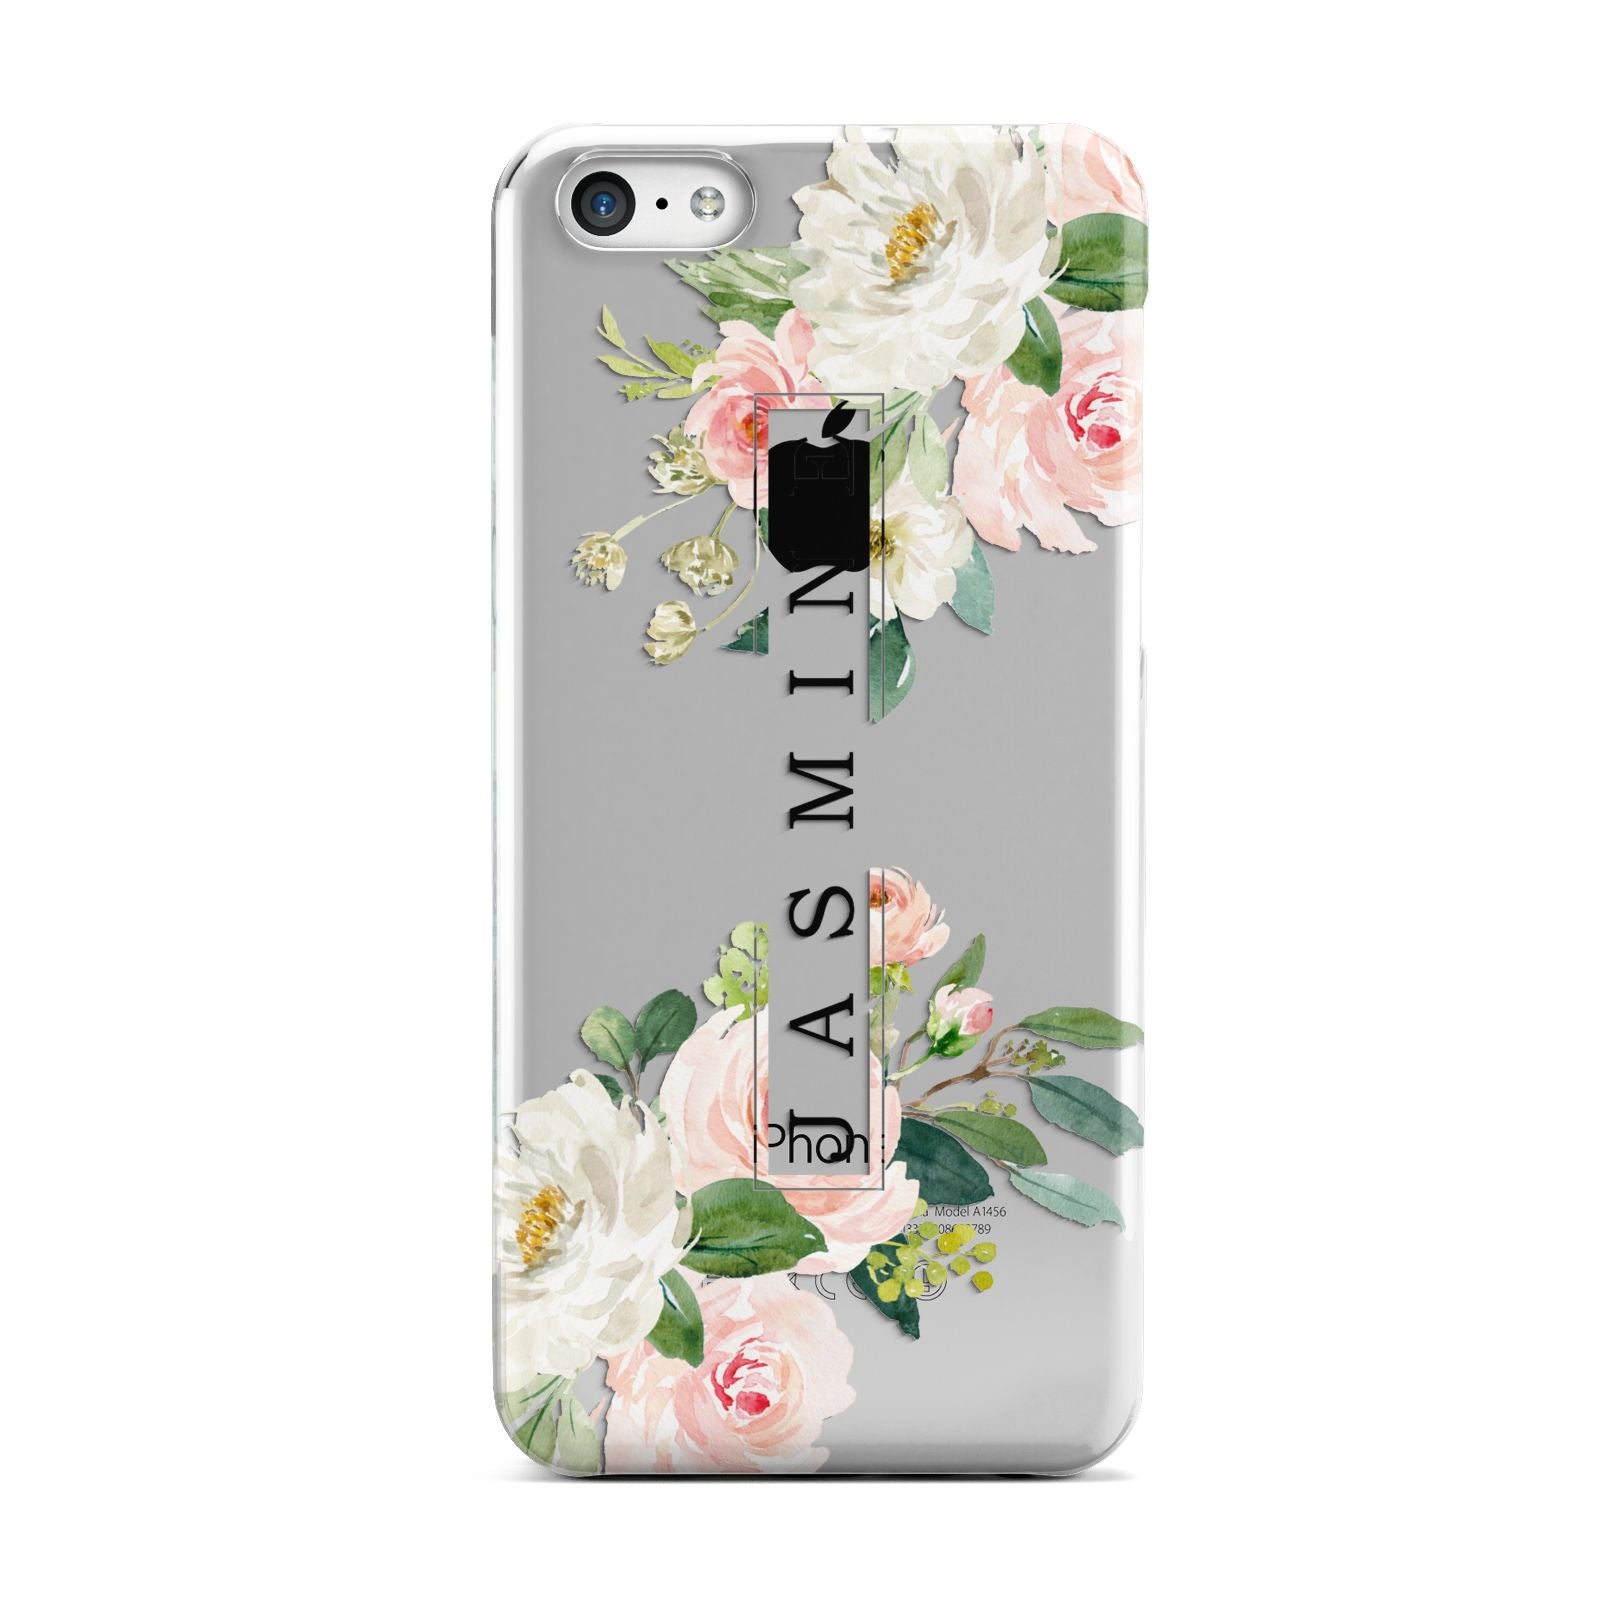 Personalised Floral Wreath with Name Apple iPhone 5c Case